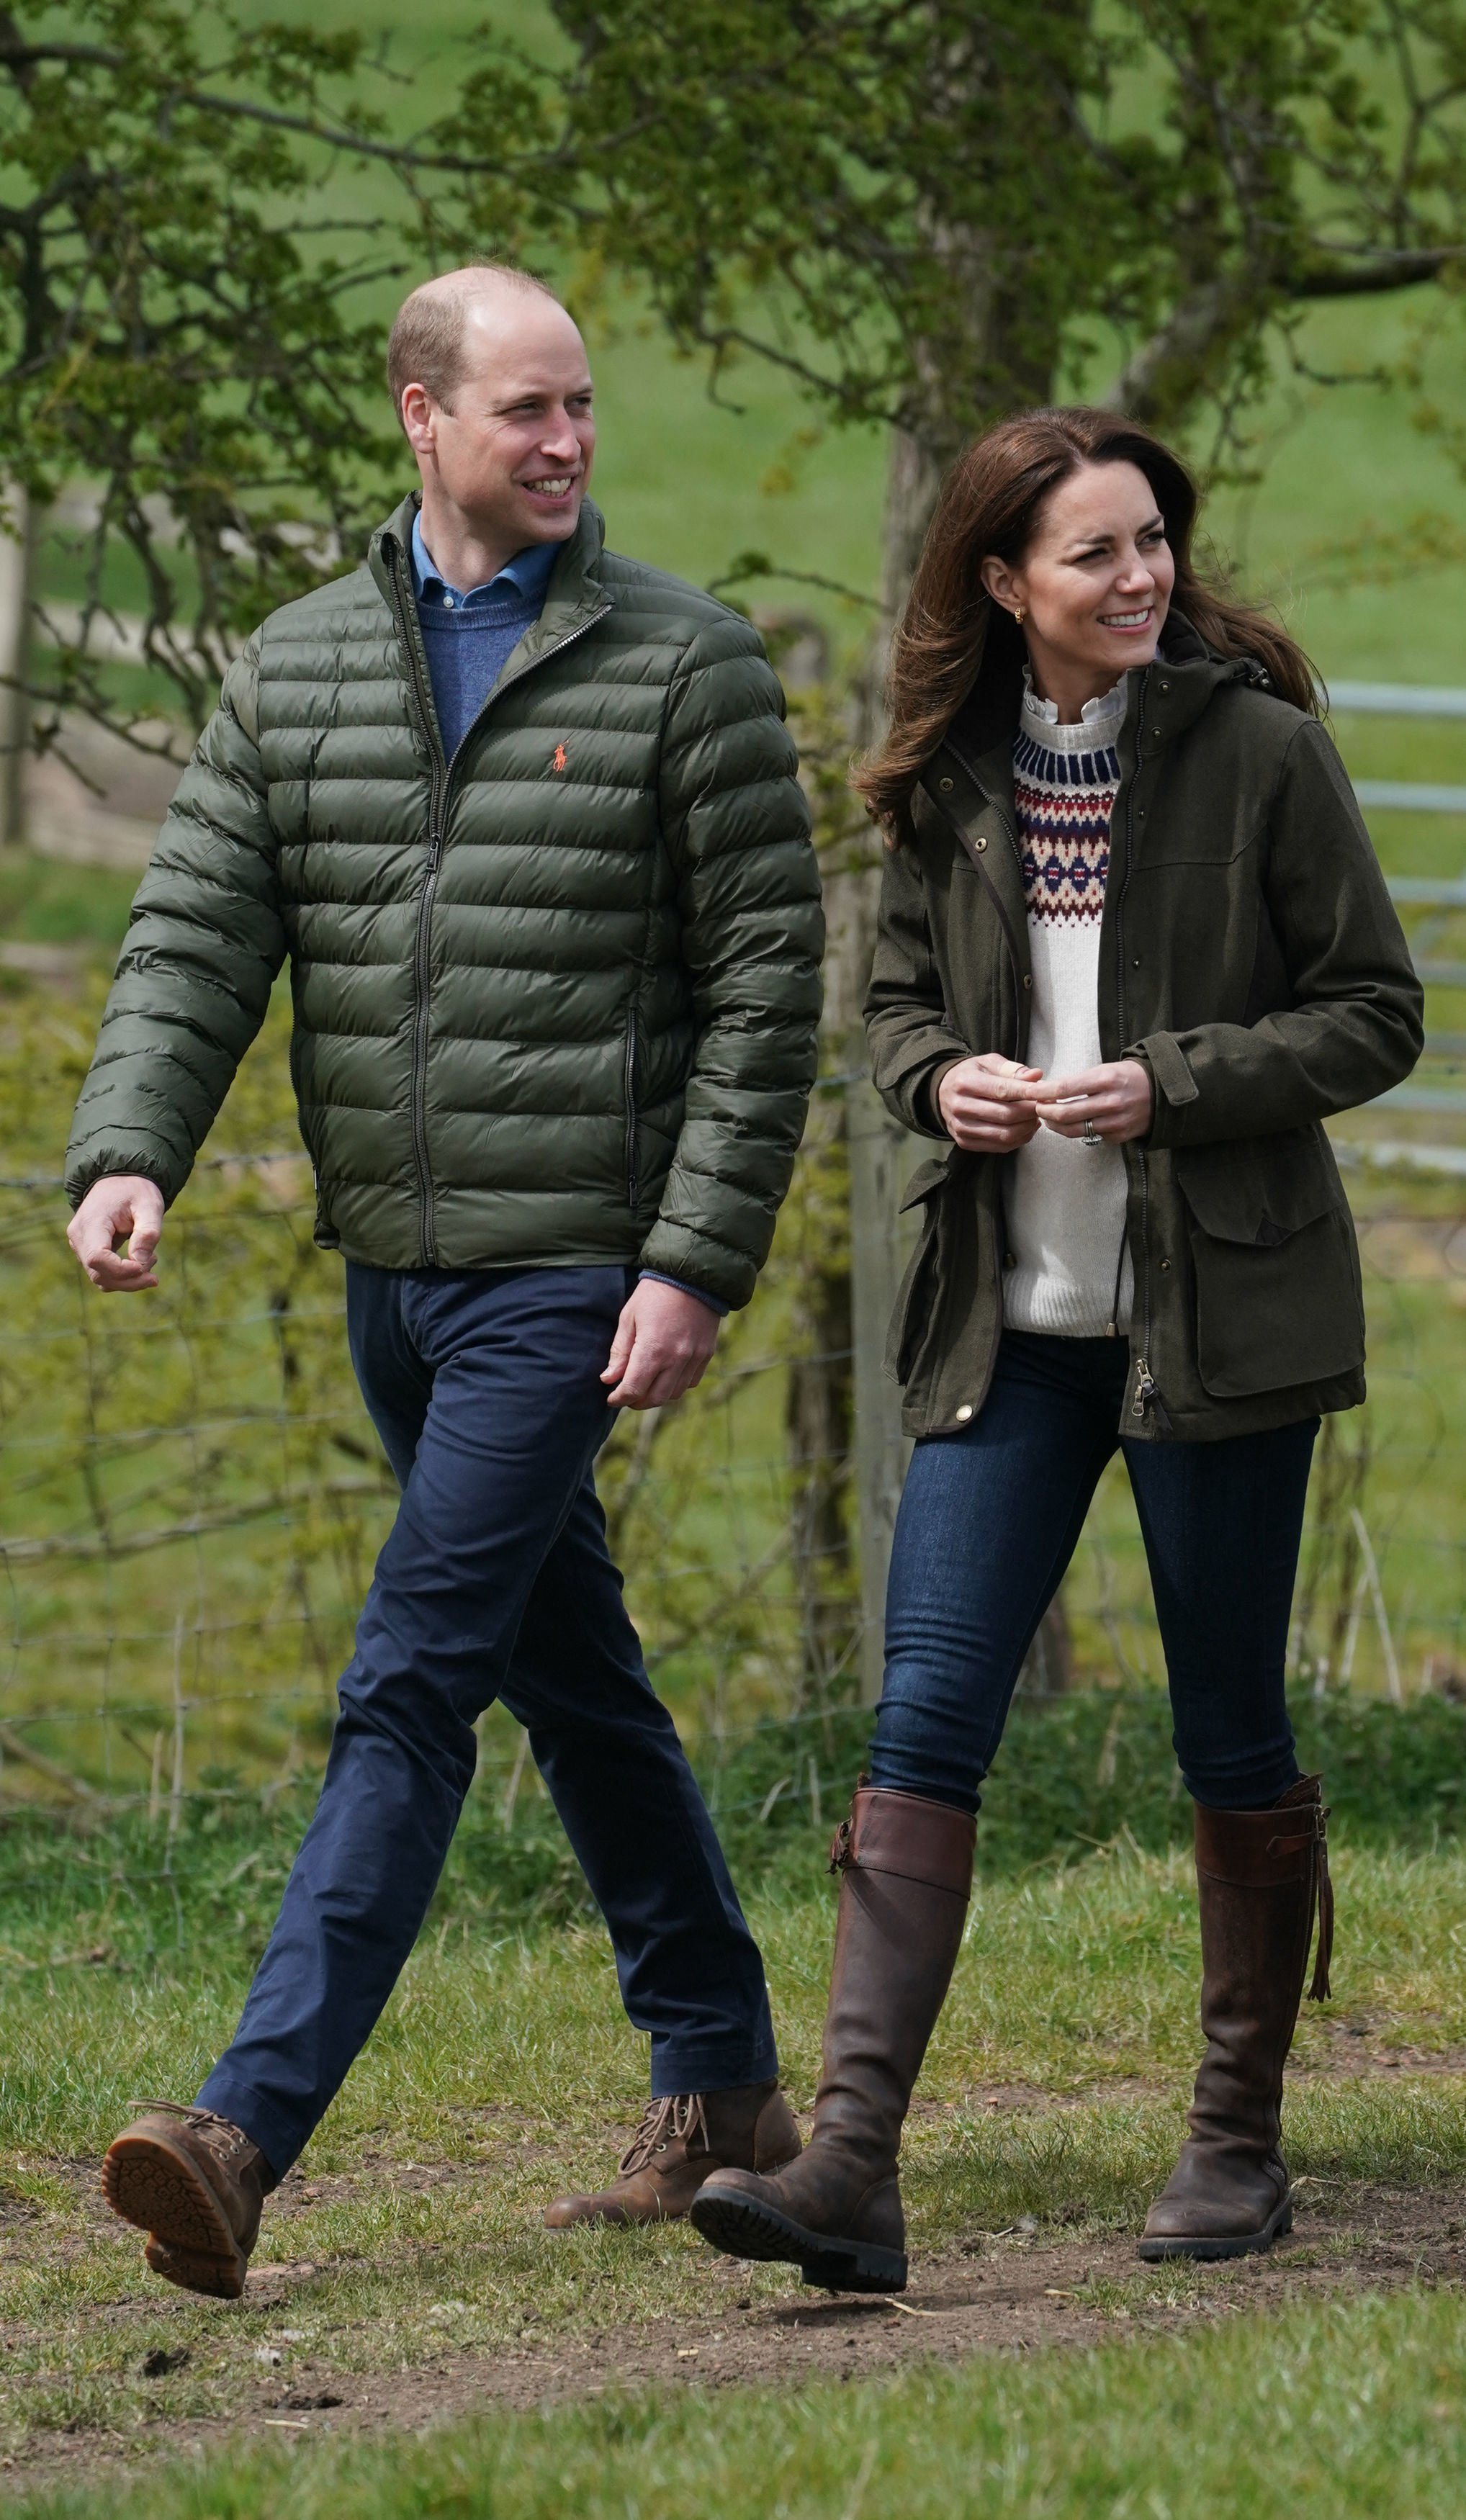 Prince William and Kate Middleton pictured during their visit to Manor Farm in Little Stainton, near Durham. | Photo: Getty Images